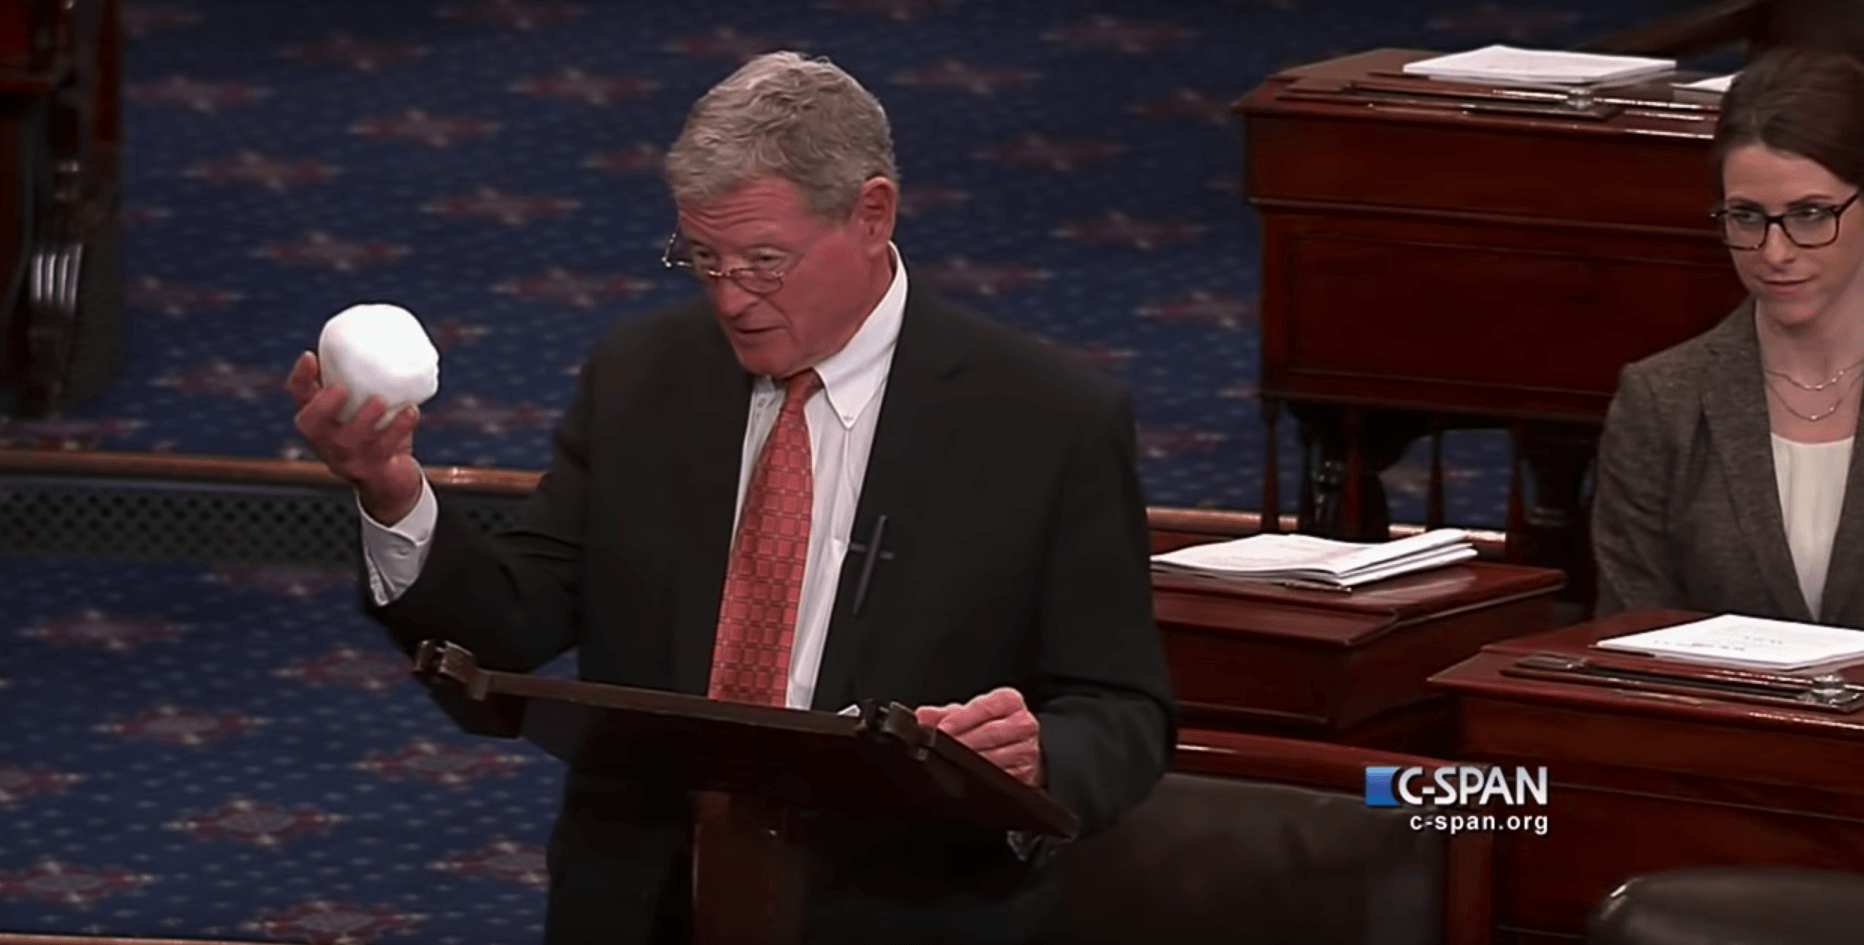 Sen. James Inhofe brings a snowball to work to show that it still gets cold. Credit: C-SPAN.